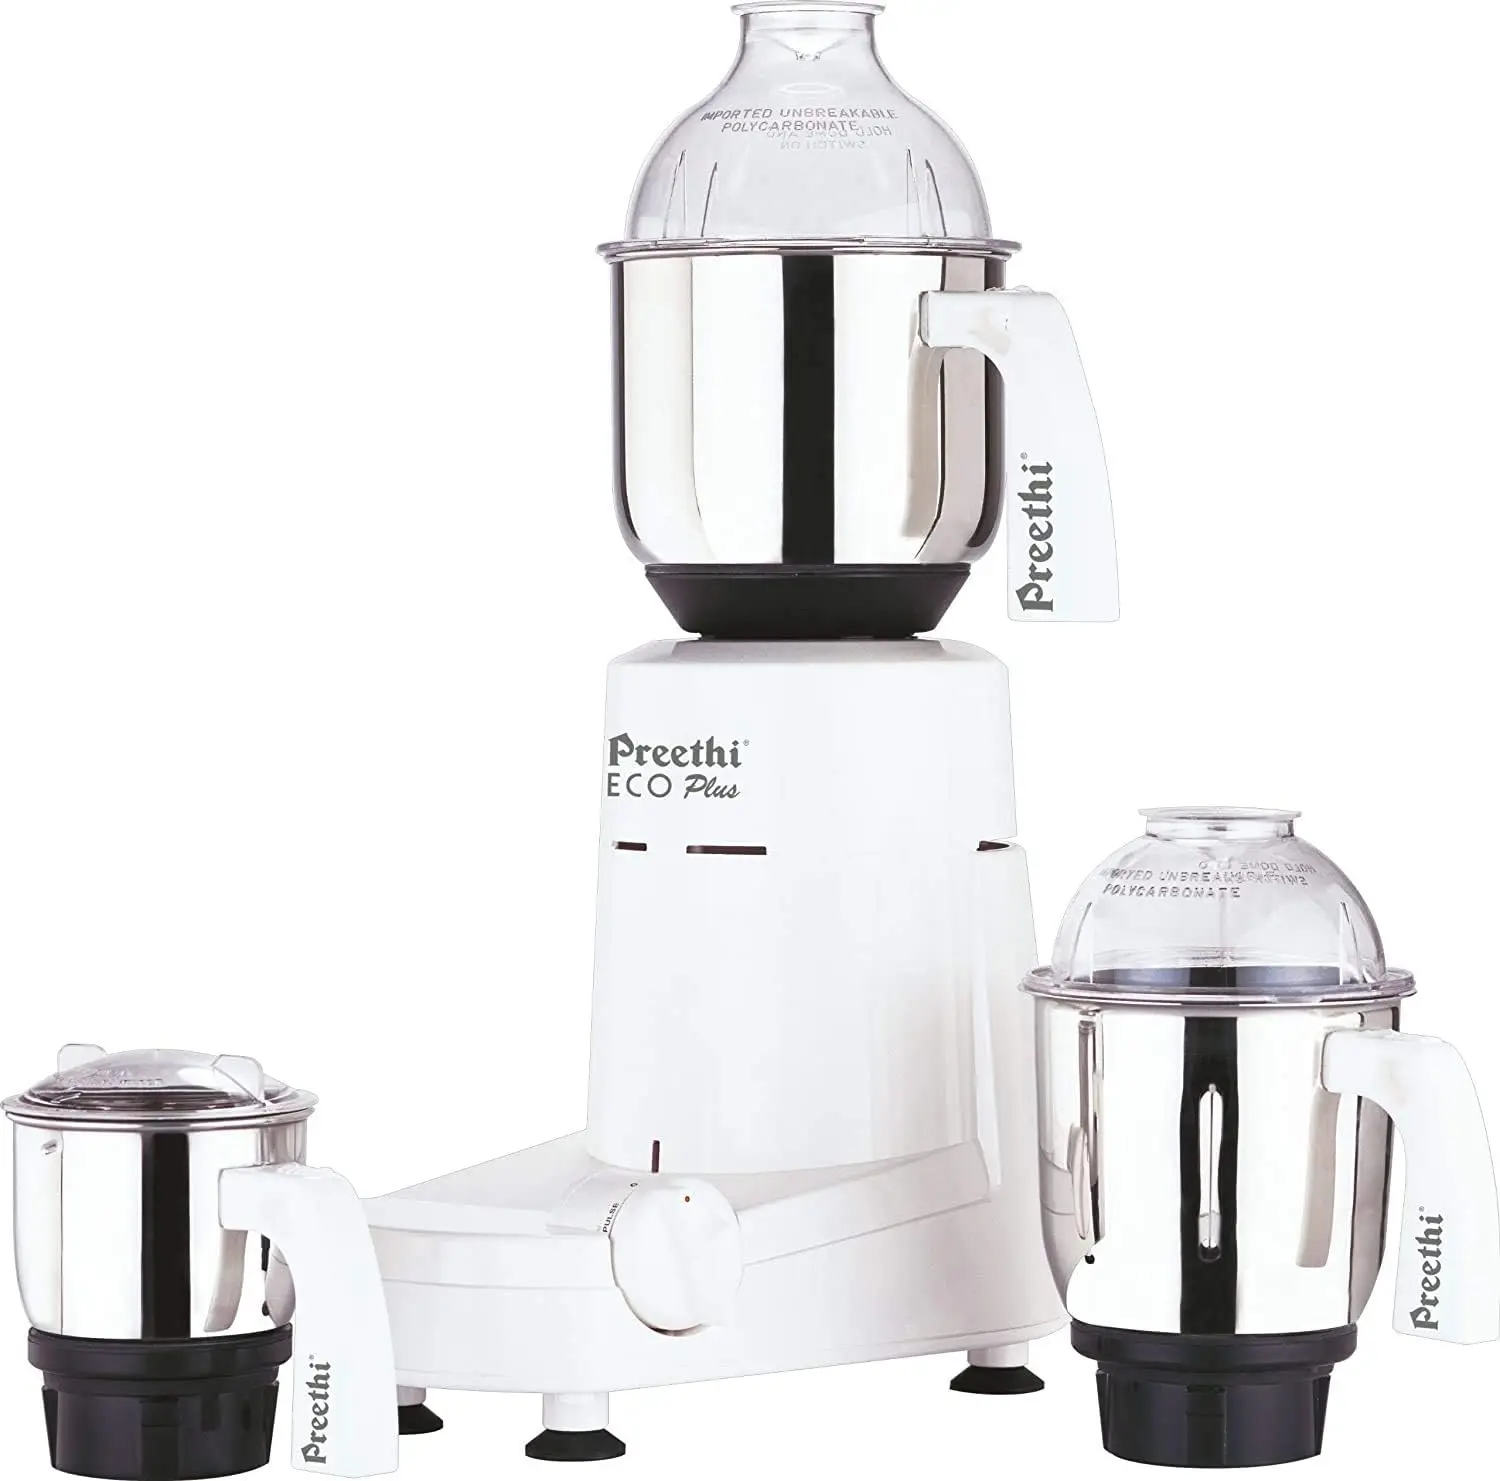 

Plus Mixer Grinder 110 Volts - Free Service Kit Included (3 Jar with Extra 1.75L Jar)